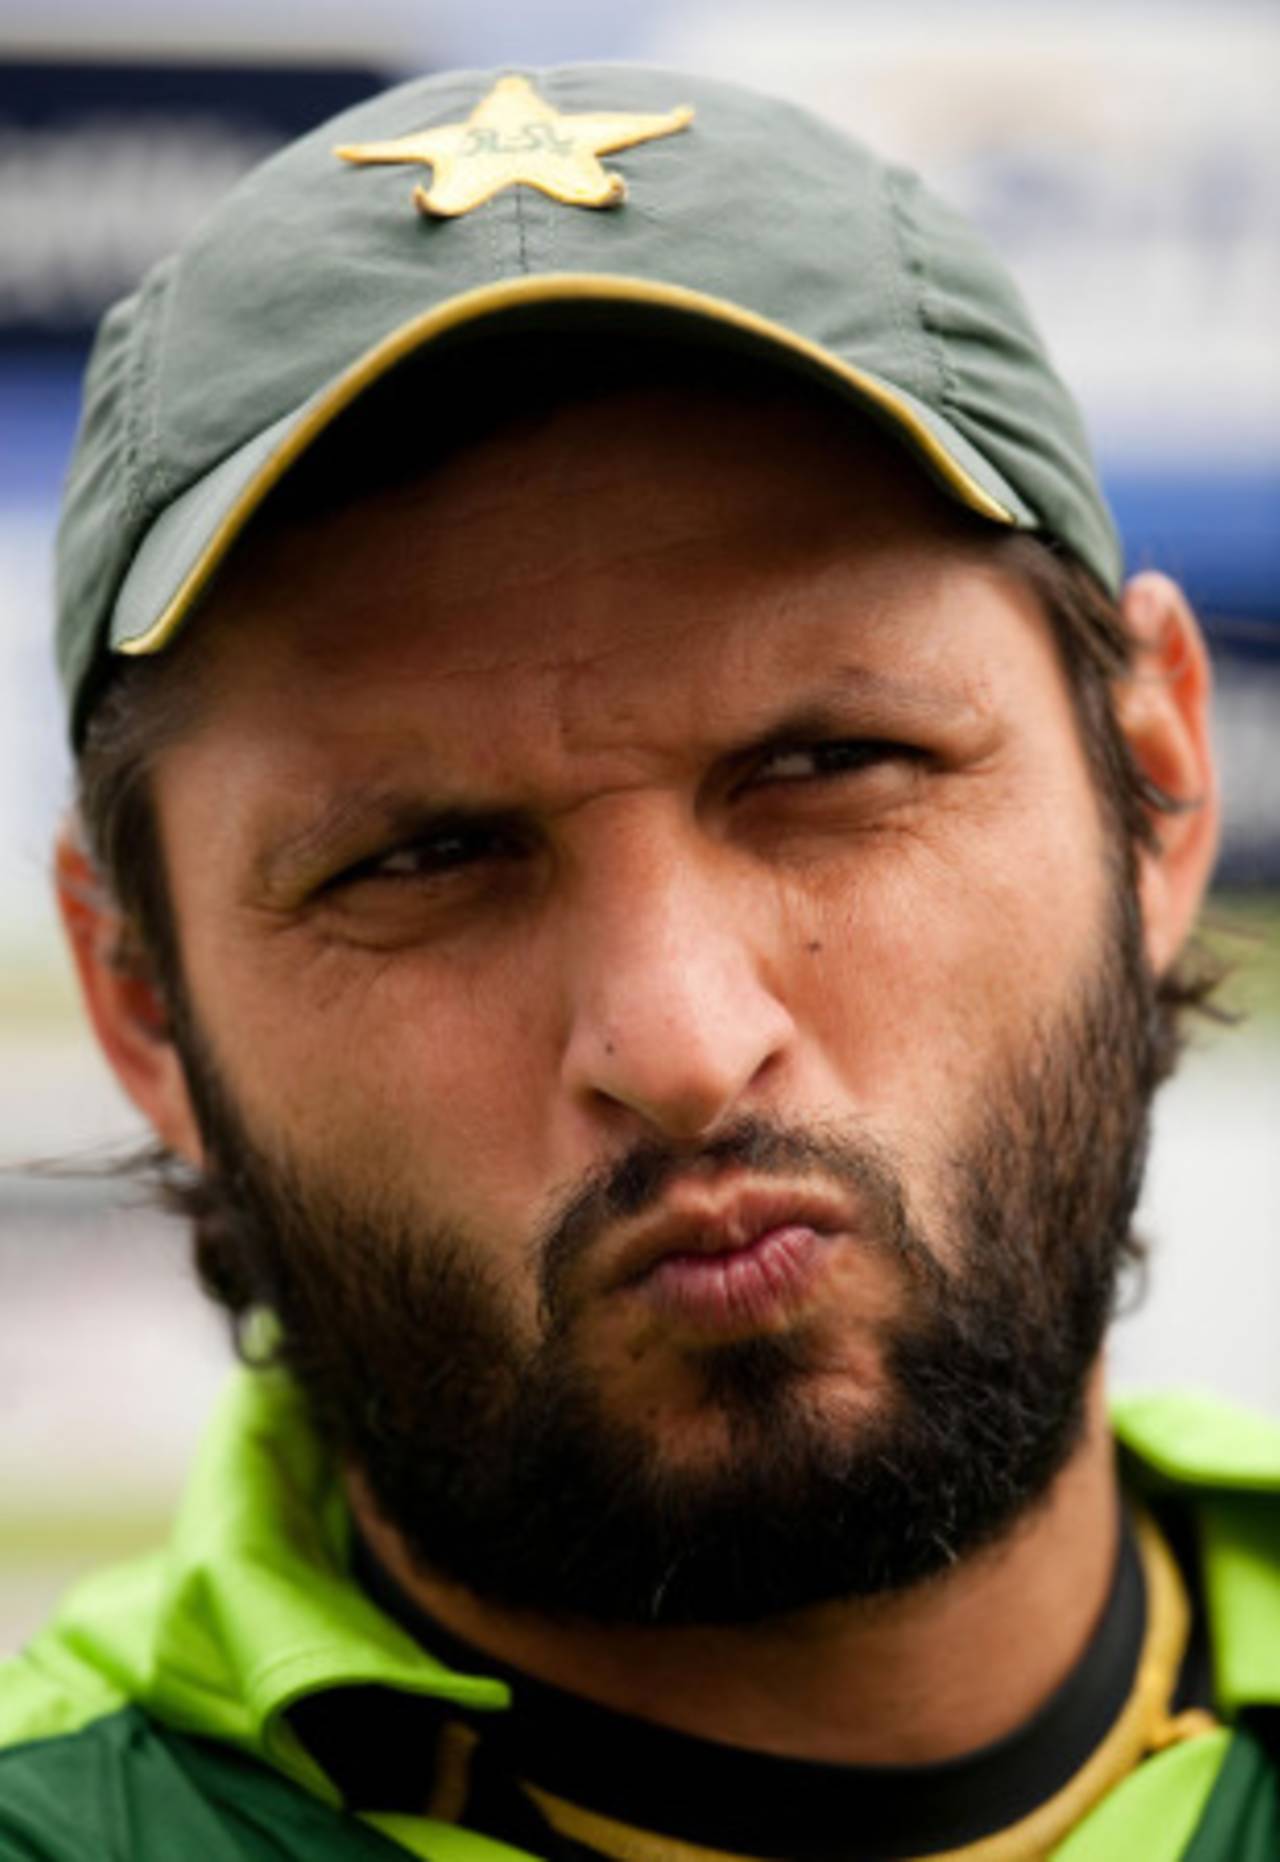 Shahid Afridi has an enormous task trying to lift Pakistan for the limited-overs series against England, Cardiff, September 4, 2010